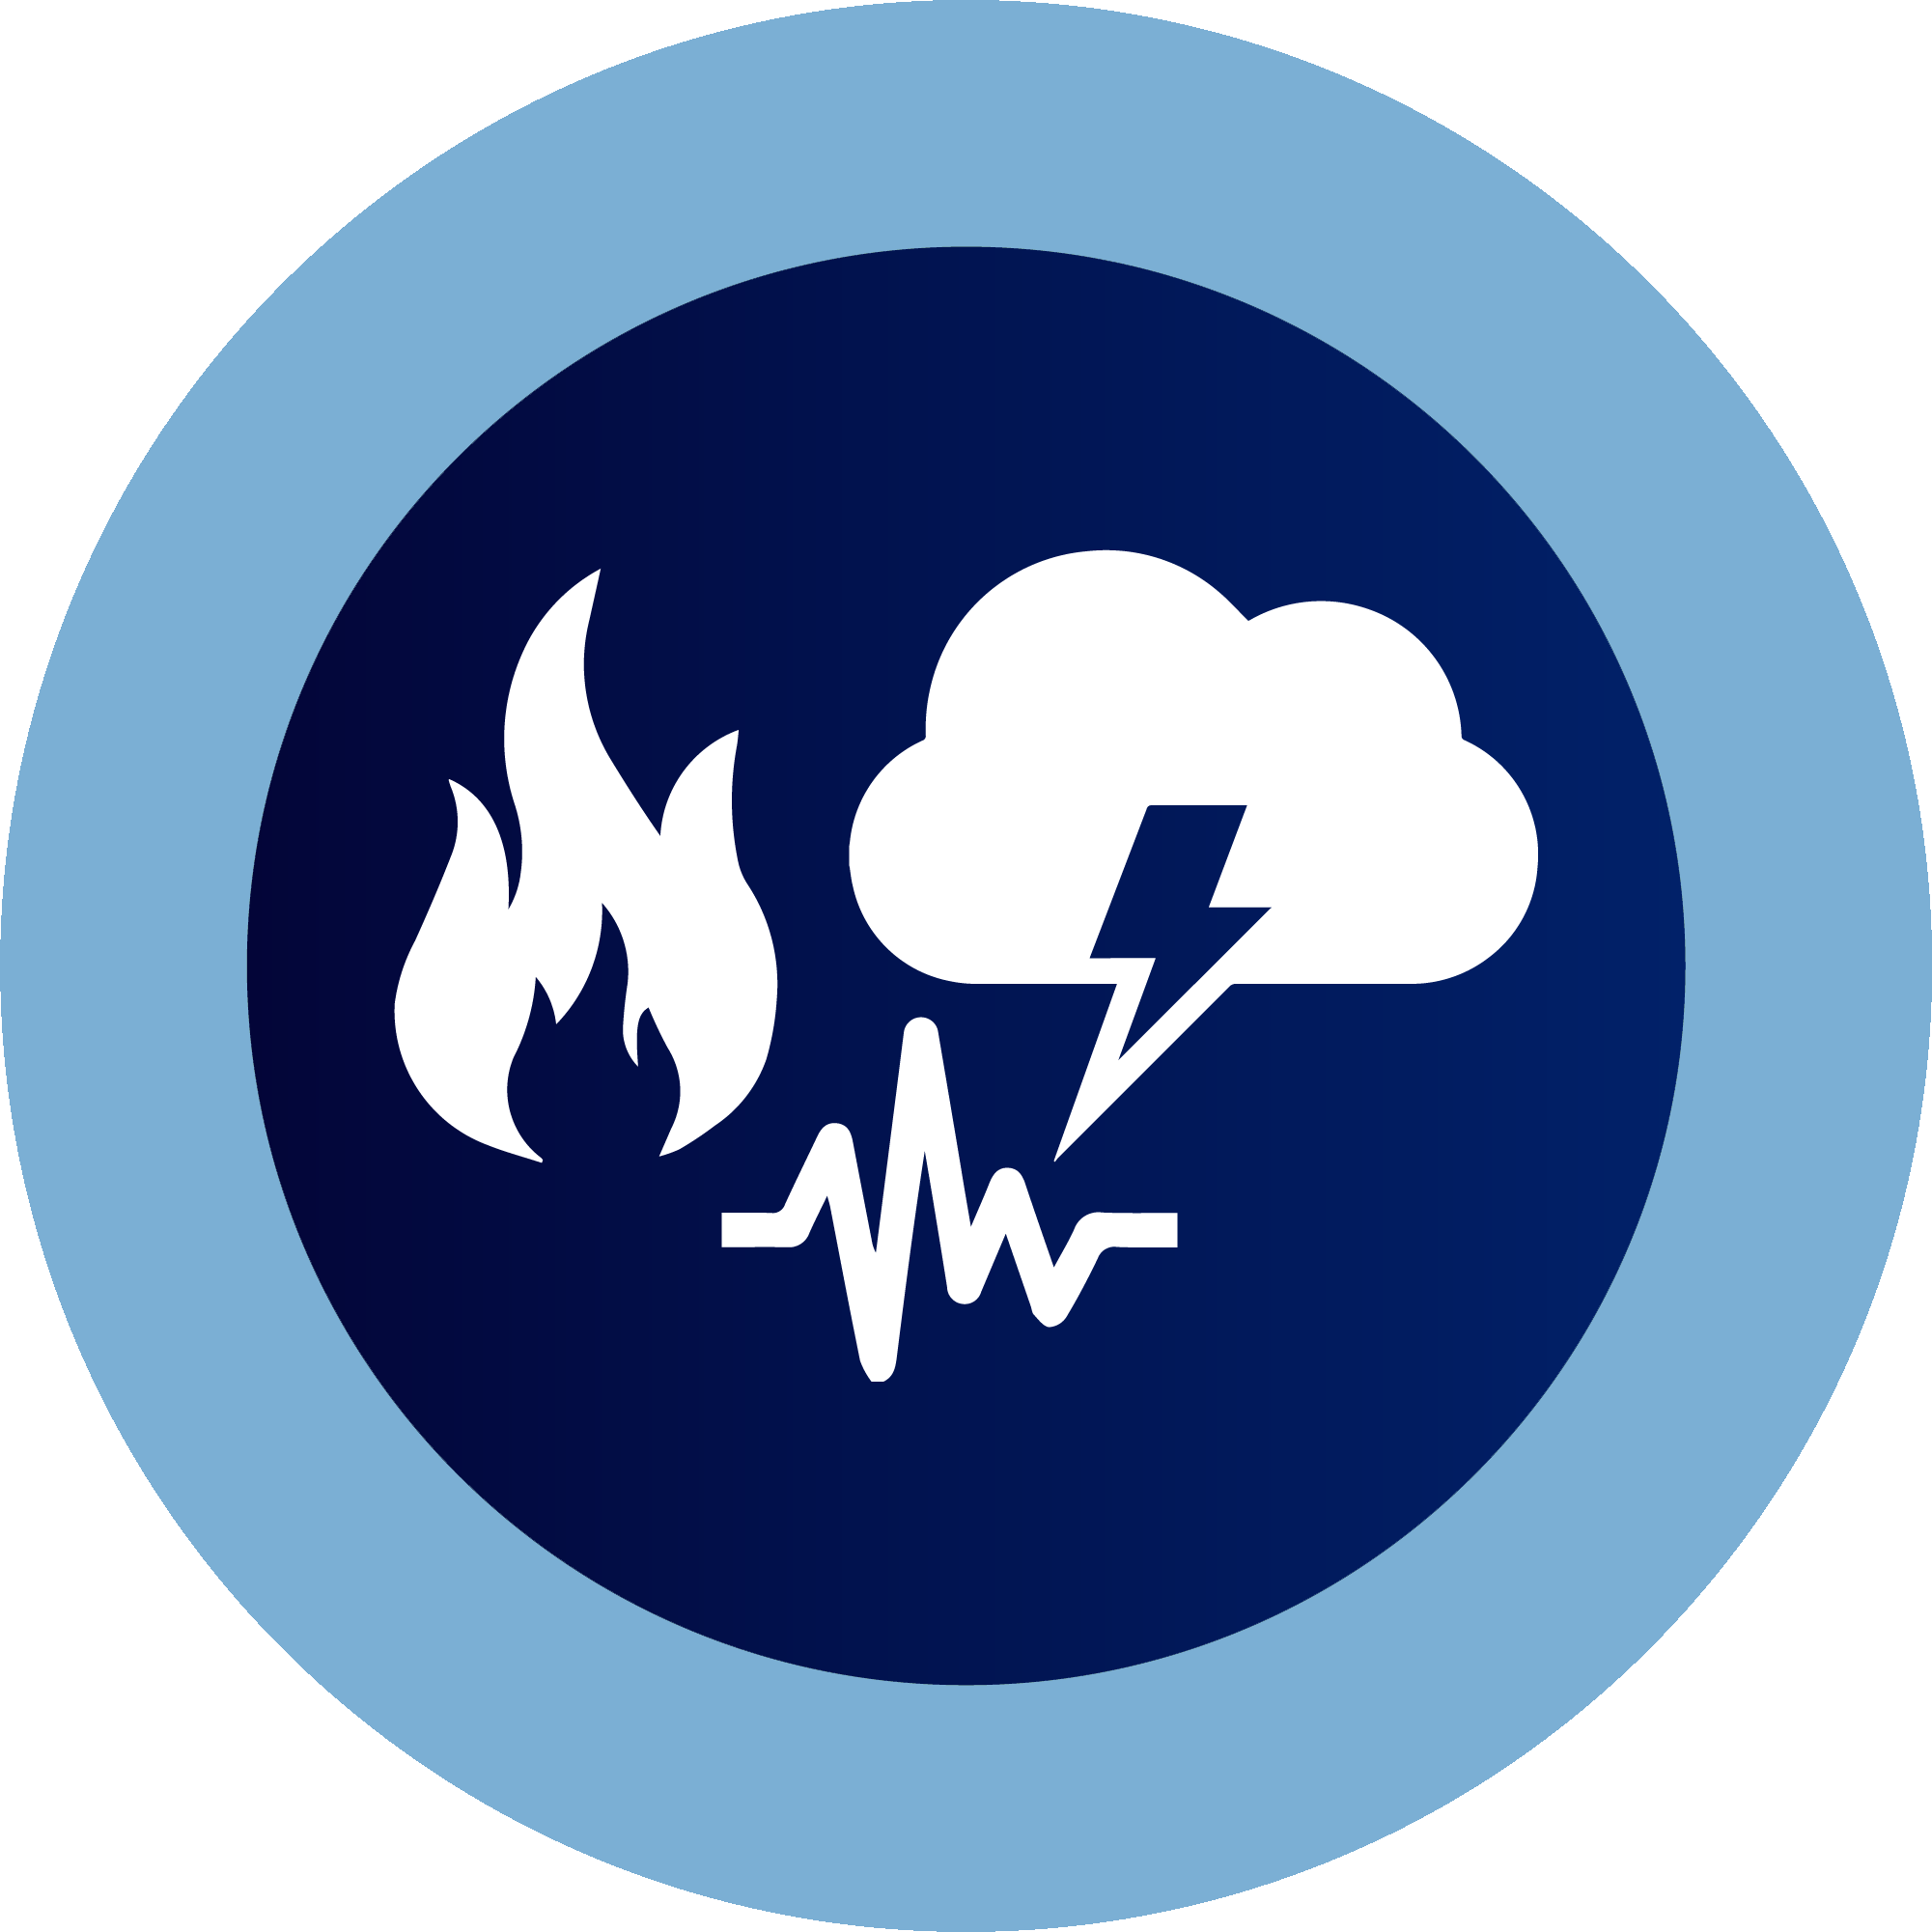 fire, cloud with lighting, and sound waves signs